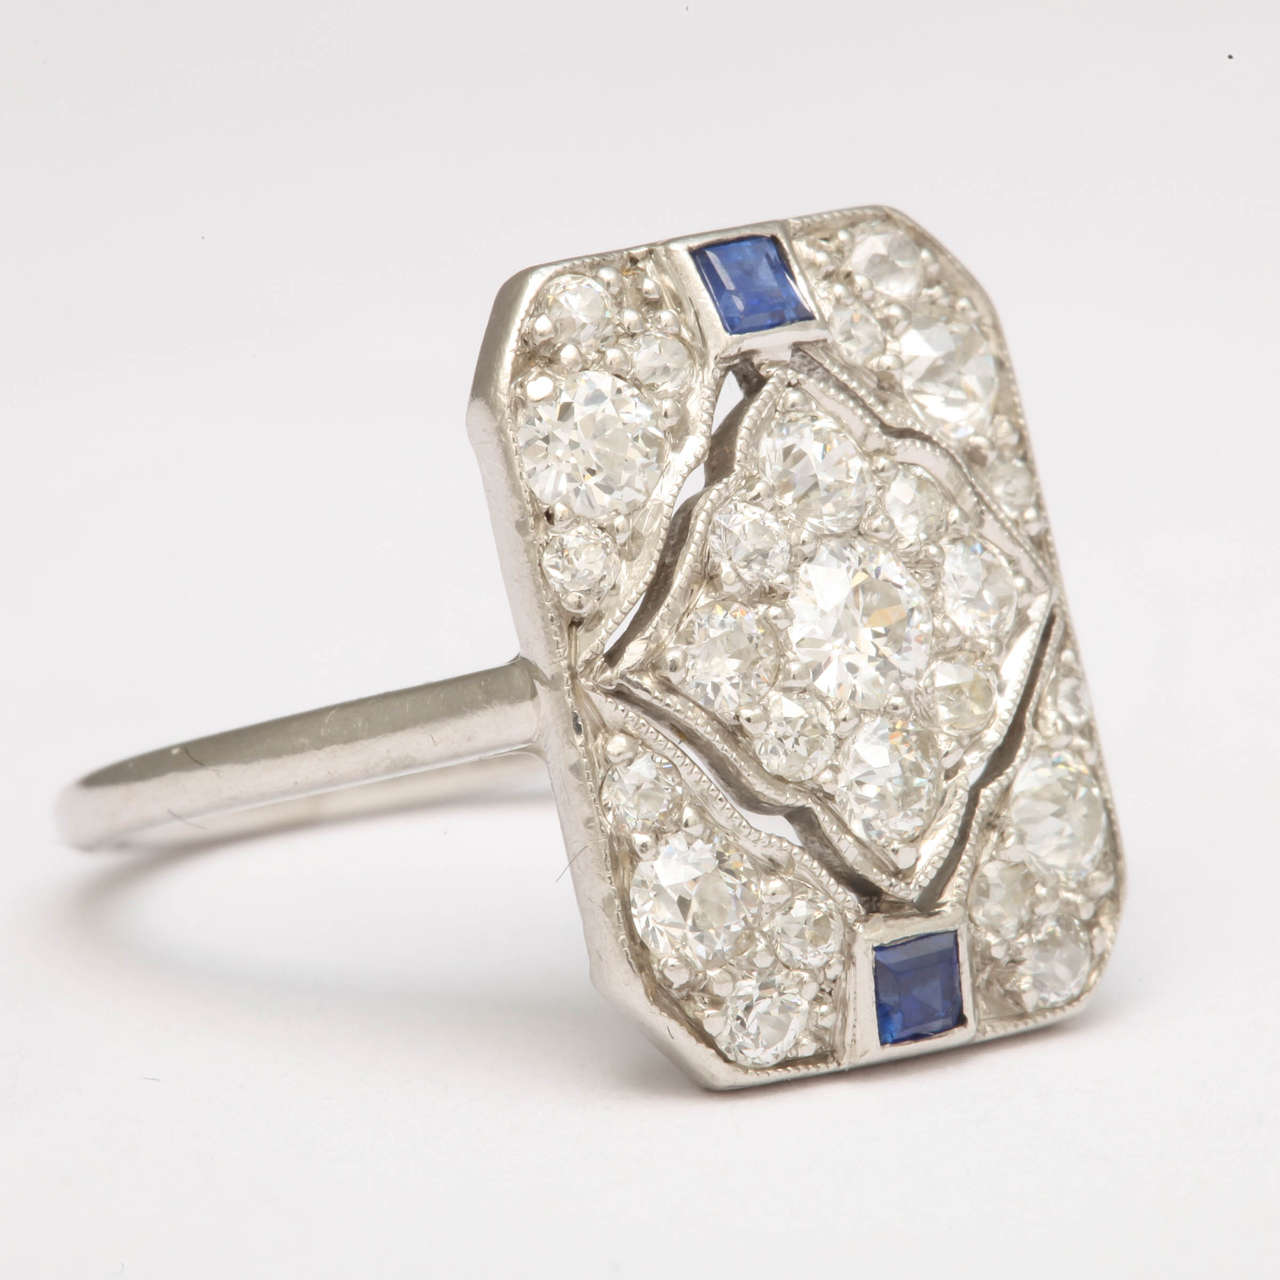 Superb Art Deco Ladies Dinner Ring set with center Diamond Tapestry & 4 Diamond Corners.  Sapphire Accents.  Set in  14kt White Gold. Number but not signed